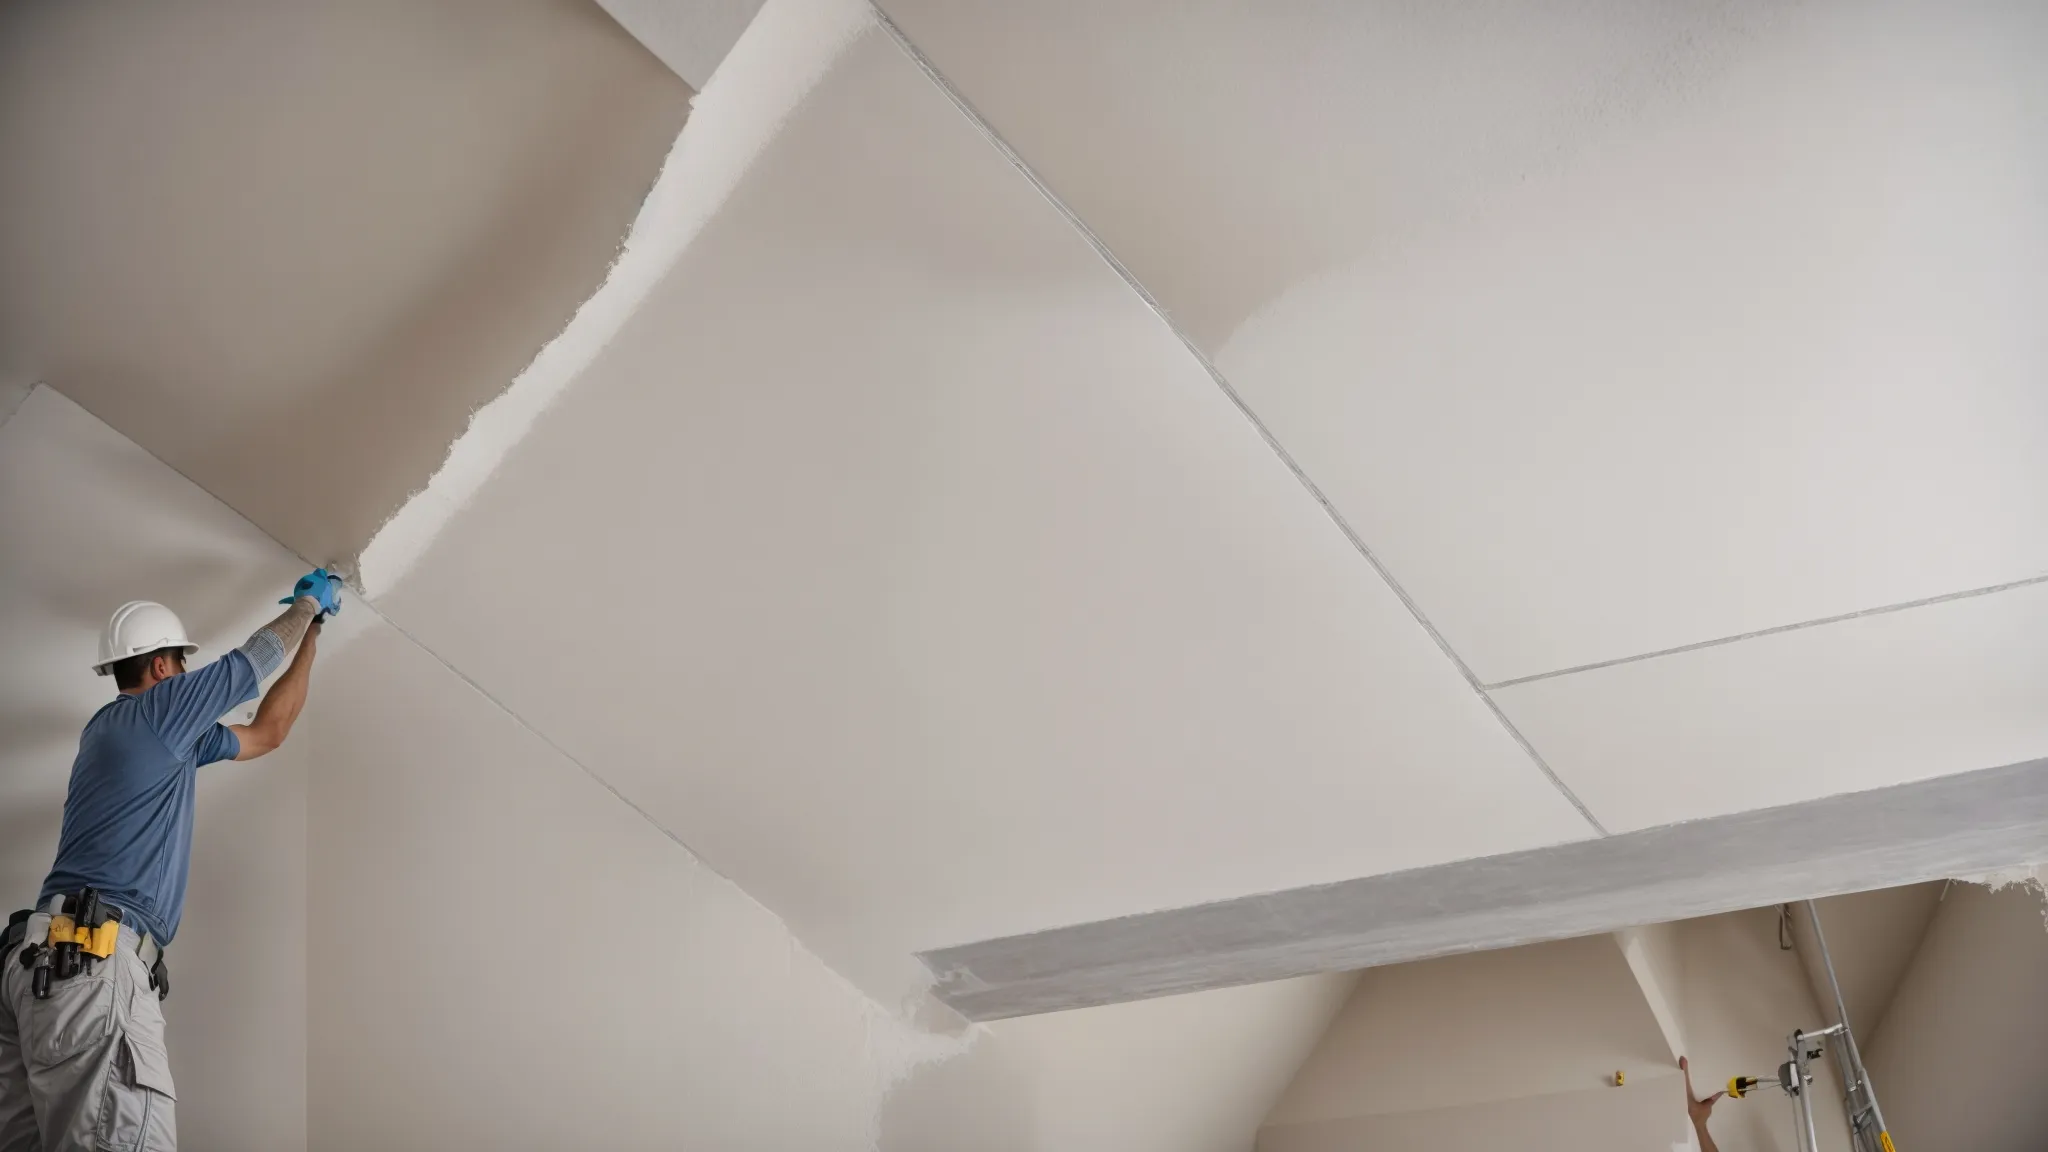 a professional drywall installer applies joint compound to seamlessly connect two large, smooth drywall panels on an interior wall of a house undergoing renovation.